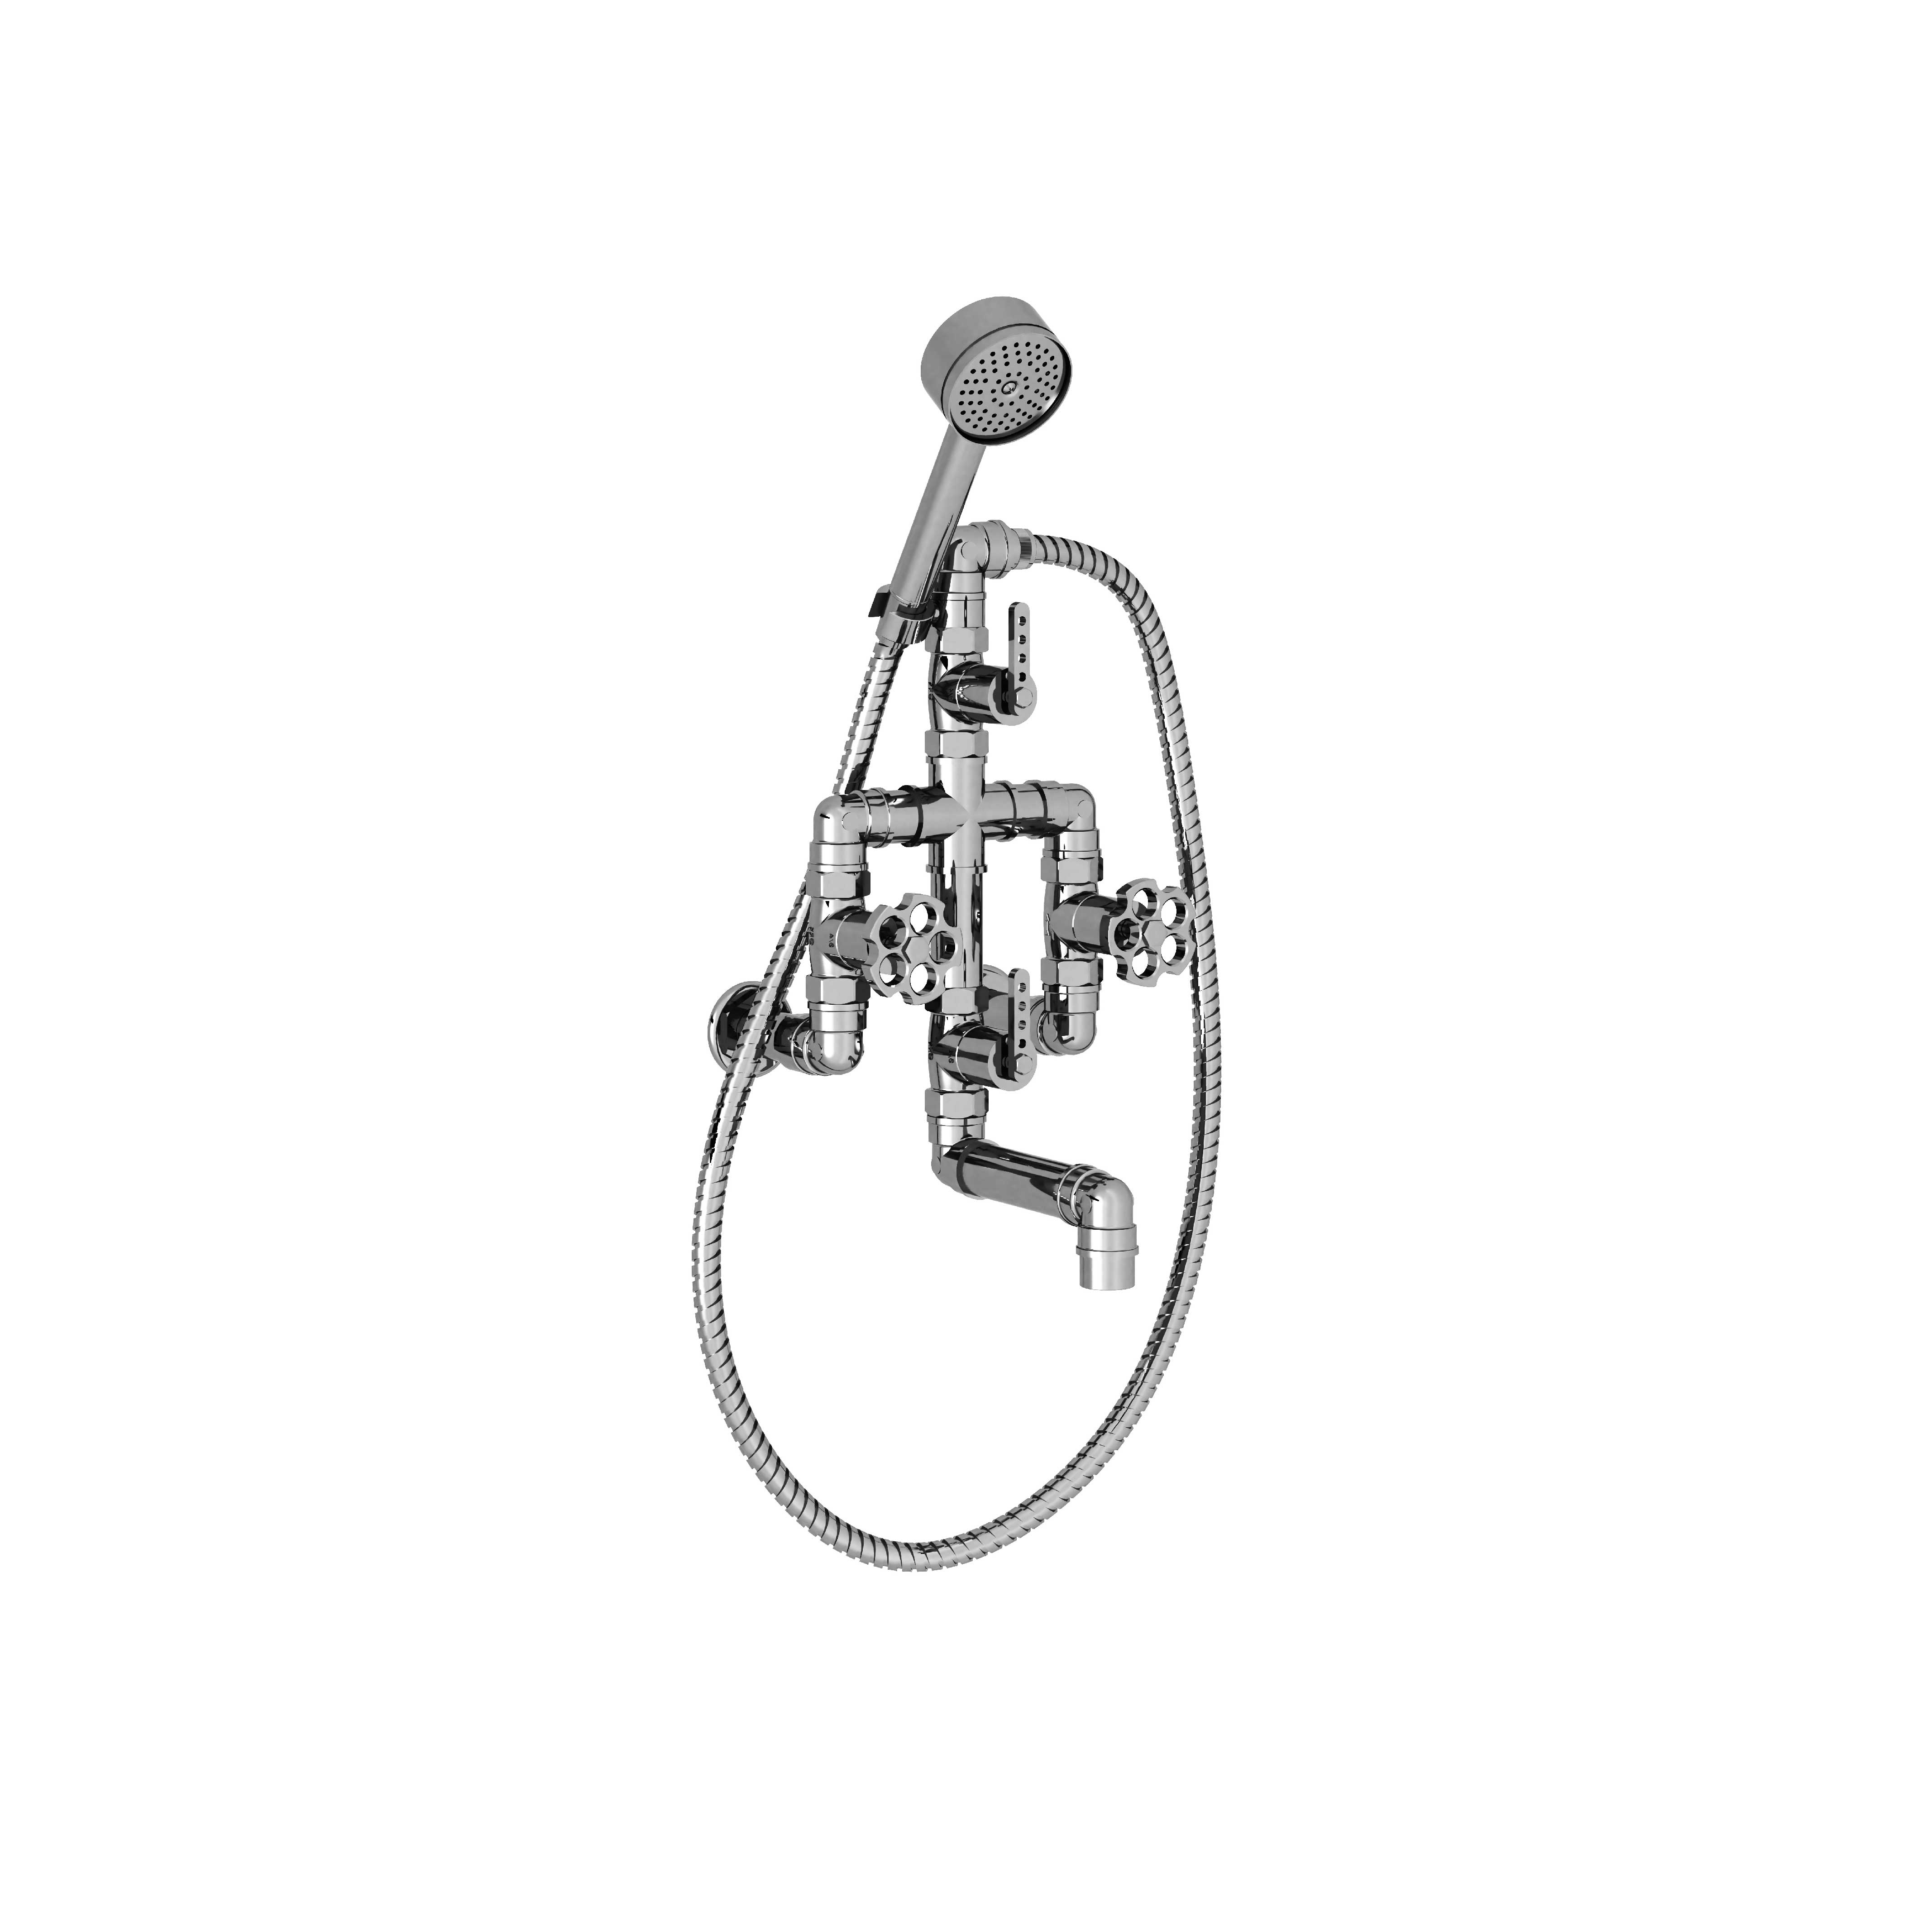 M81-3201 Wall mounted bath and shower mixer